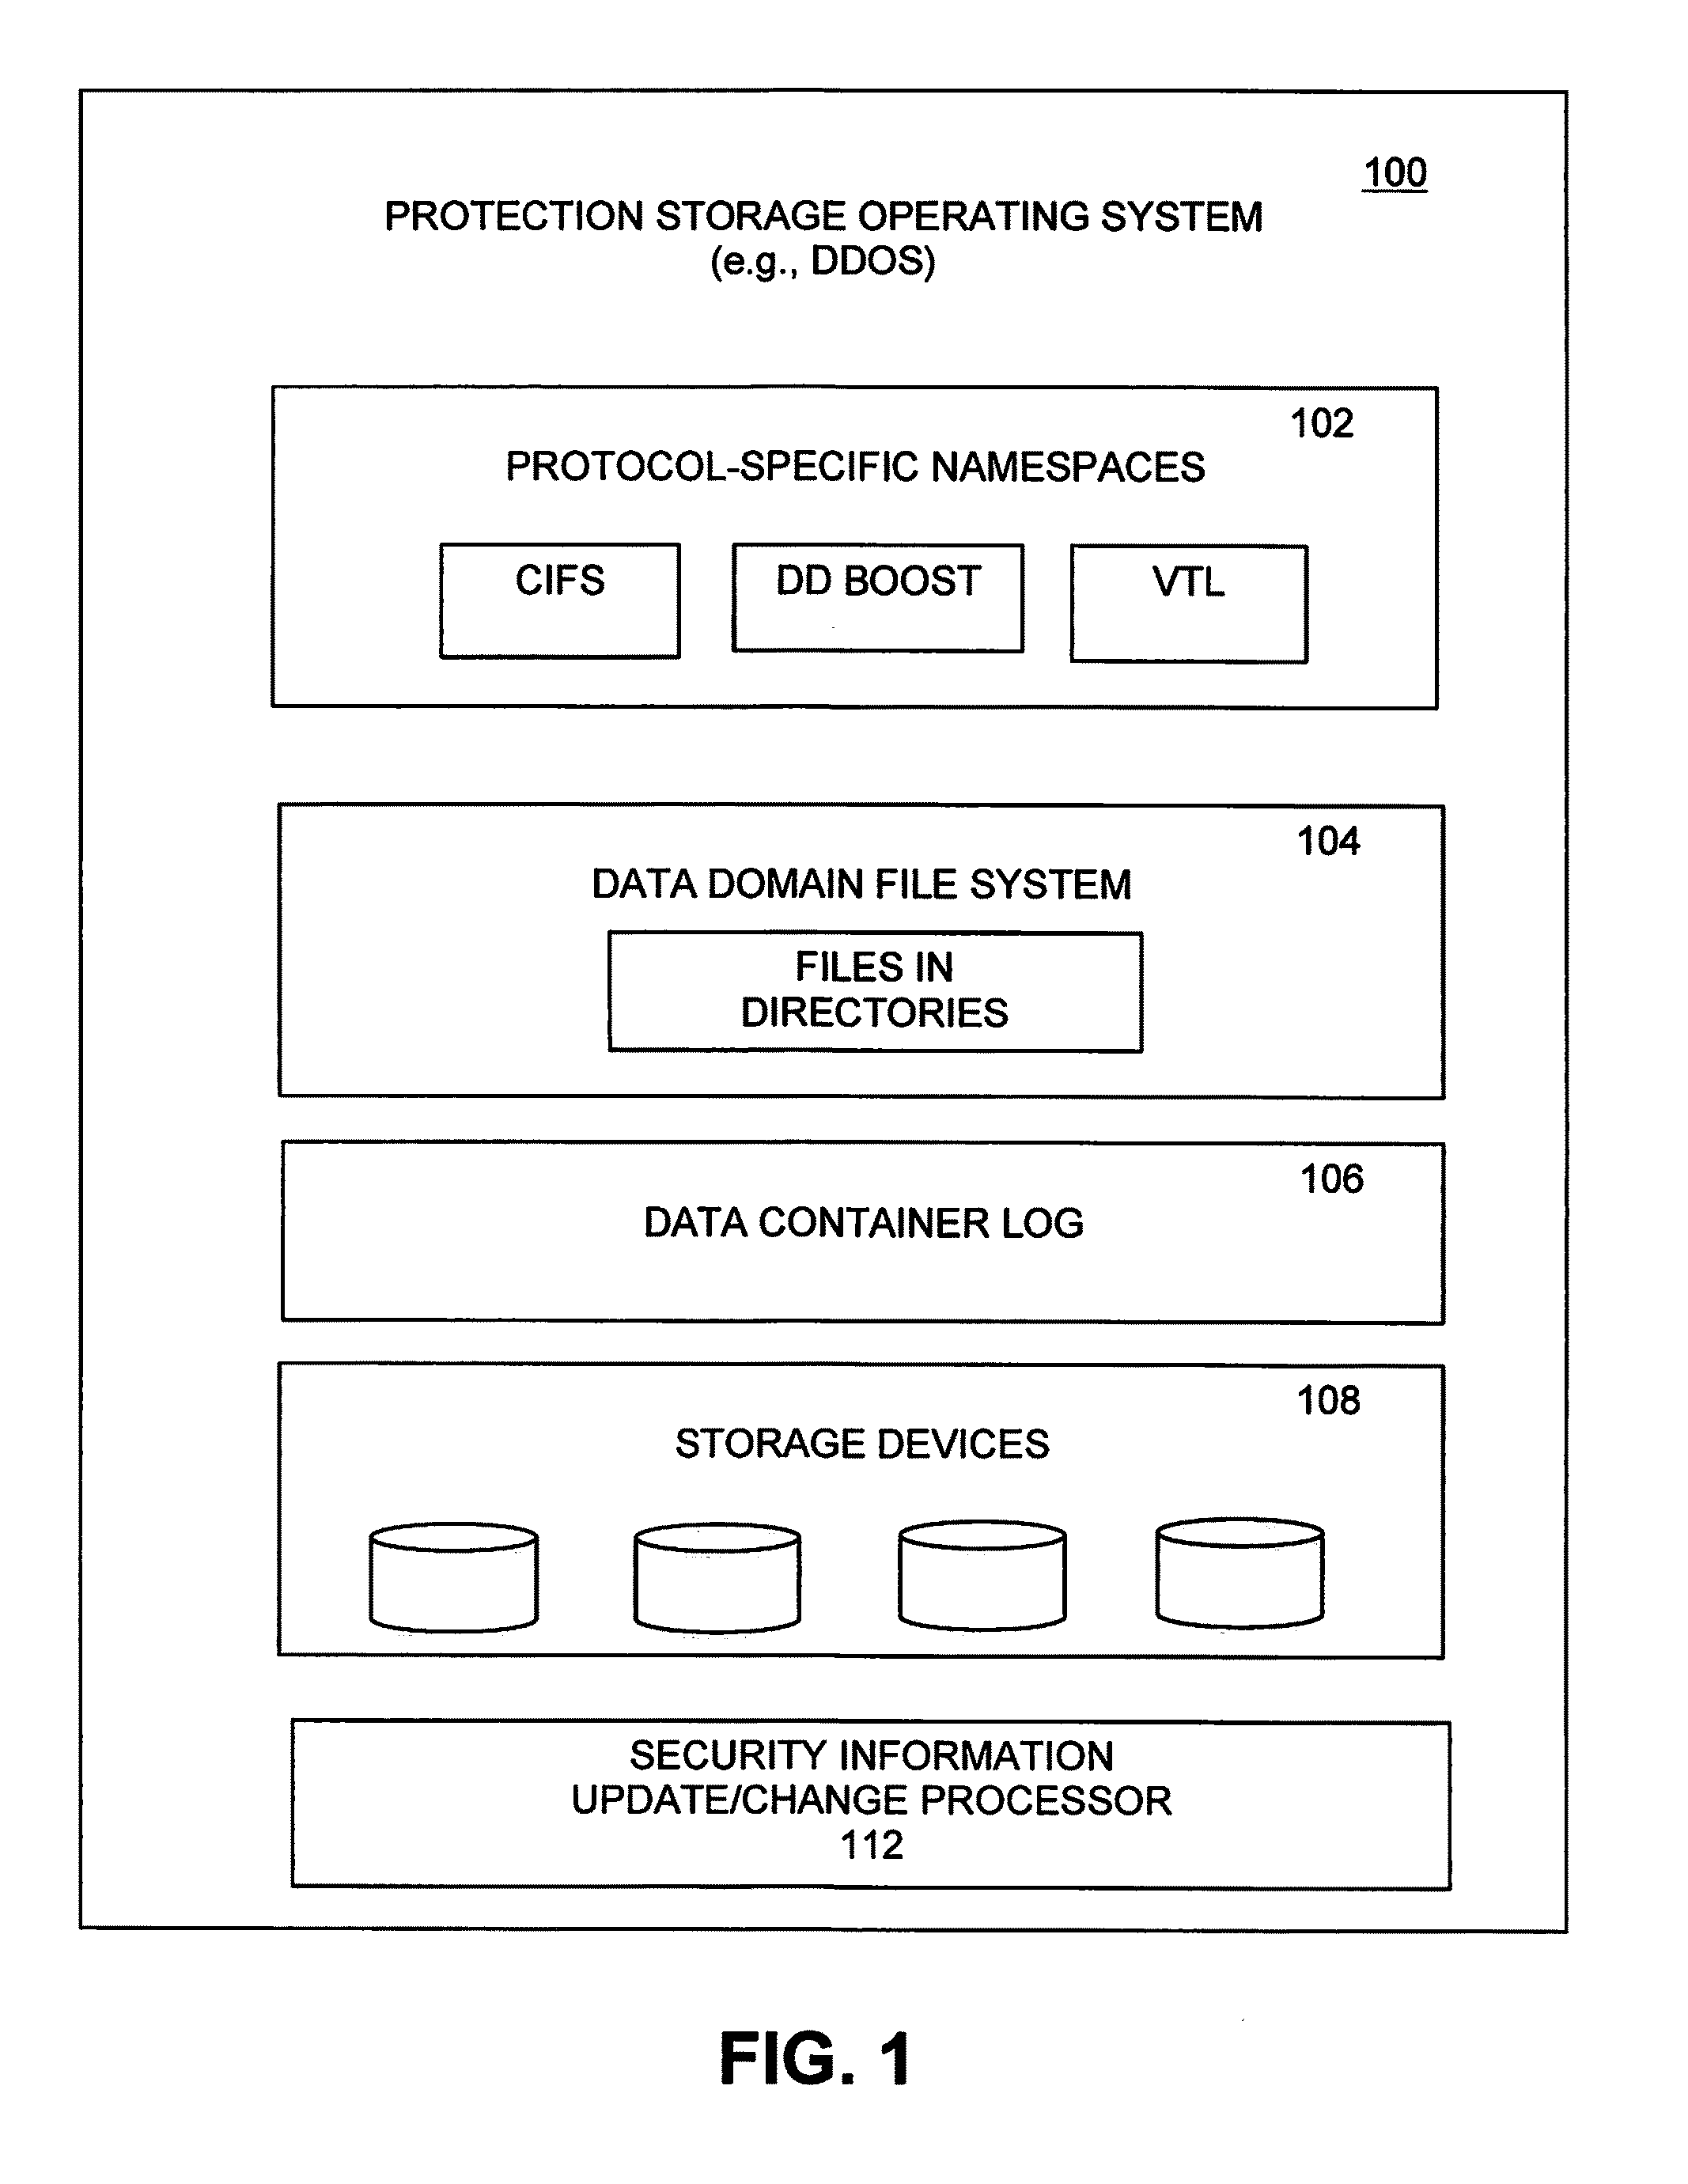 Cache-free and lock-free handling of security information for multiple distributed objects in protection storage systems